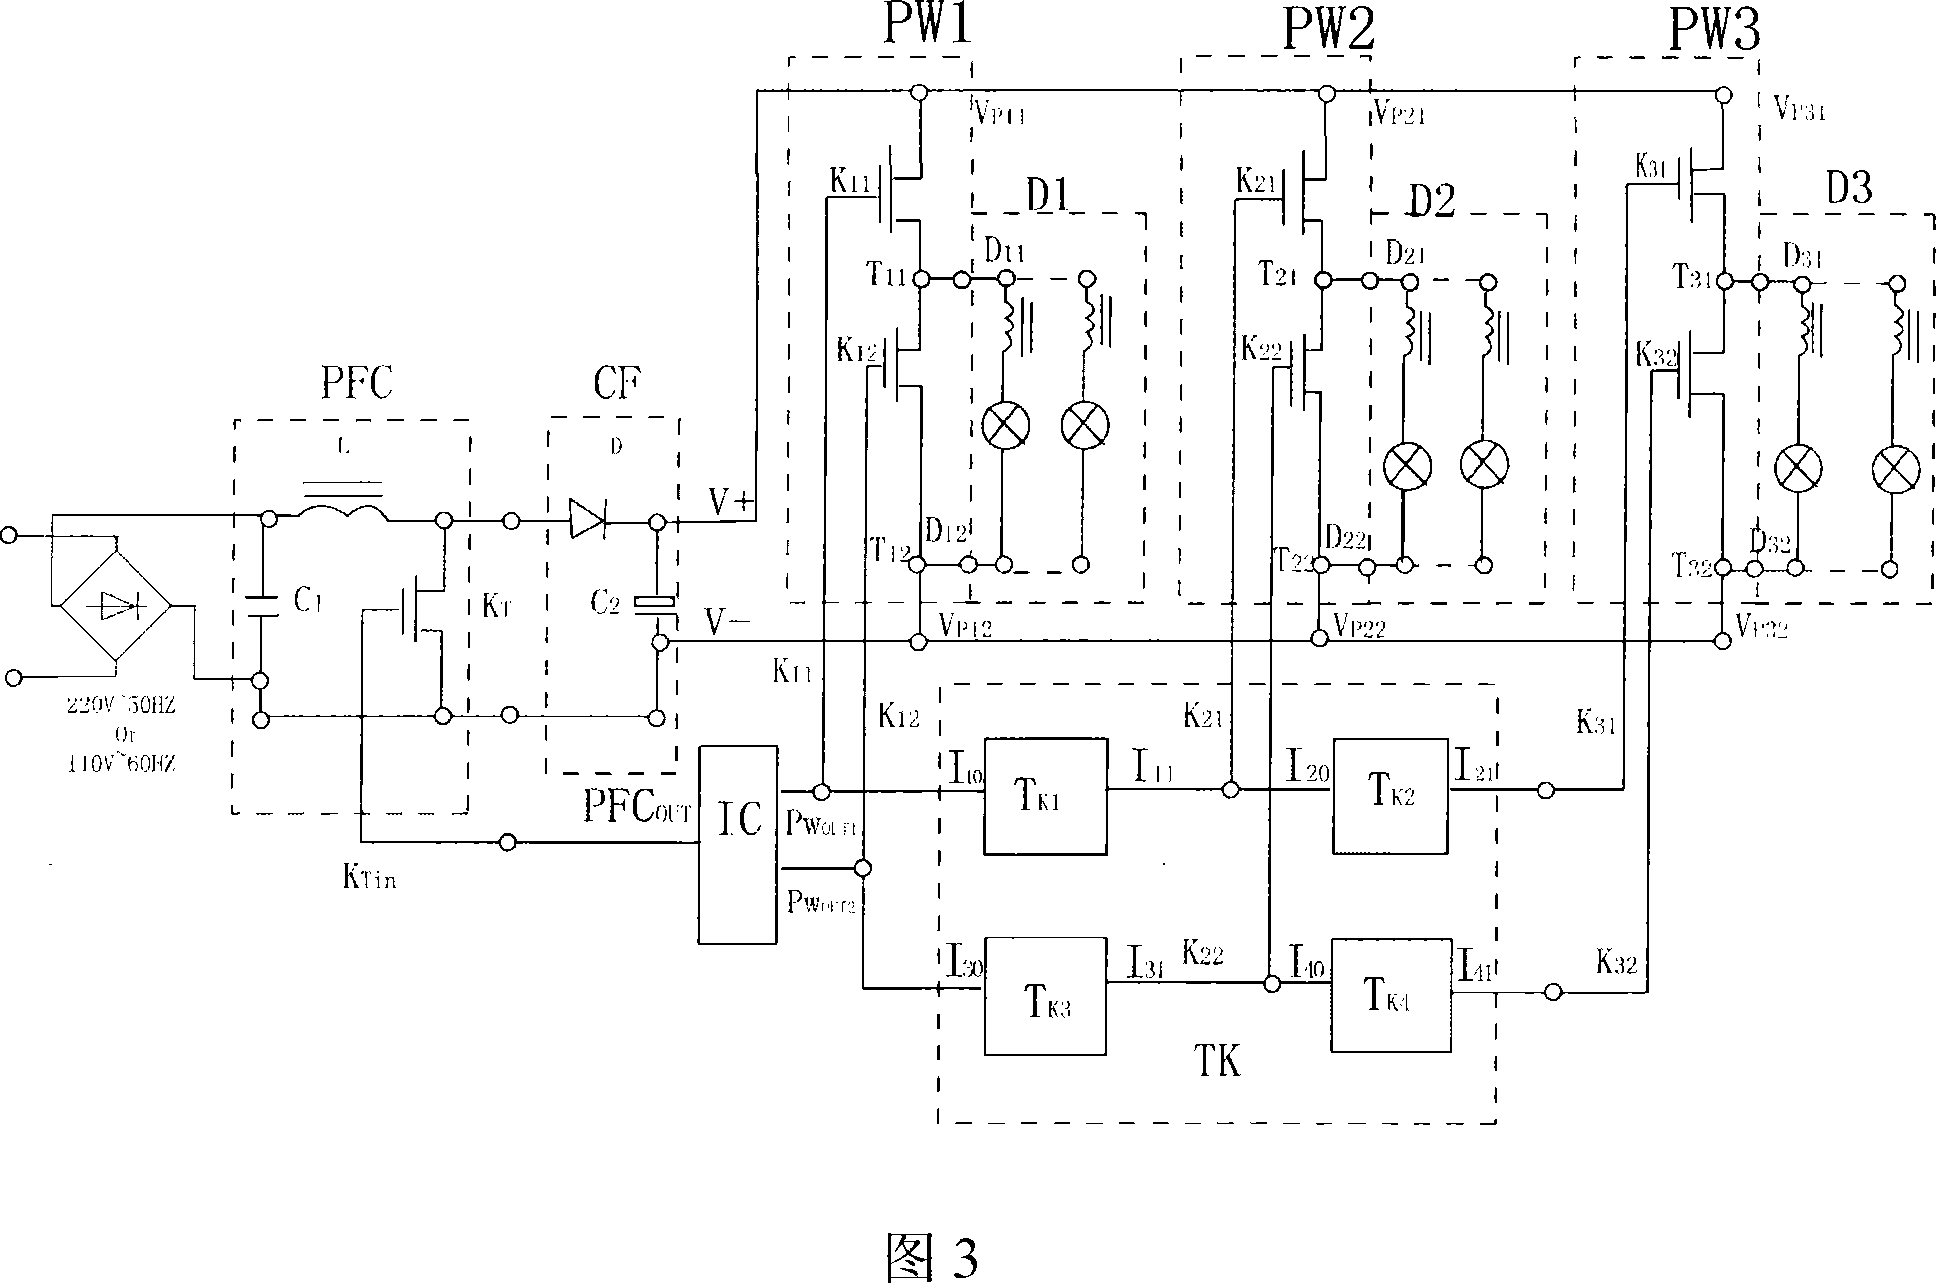 A device for lighting electric light source via multi-channel output